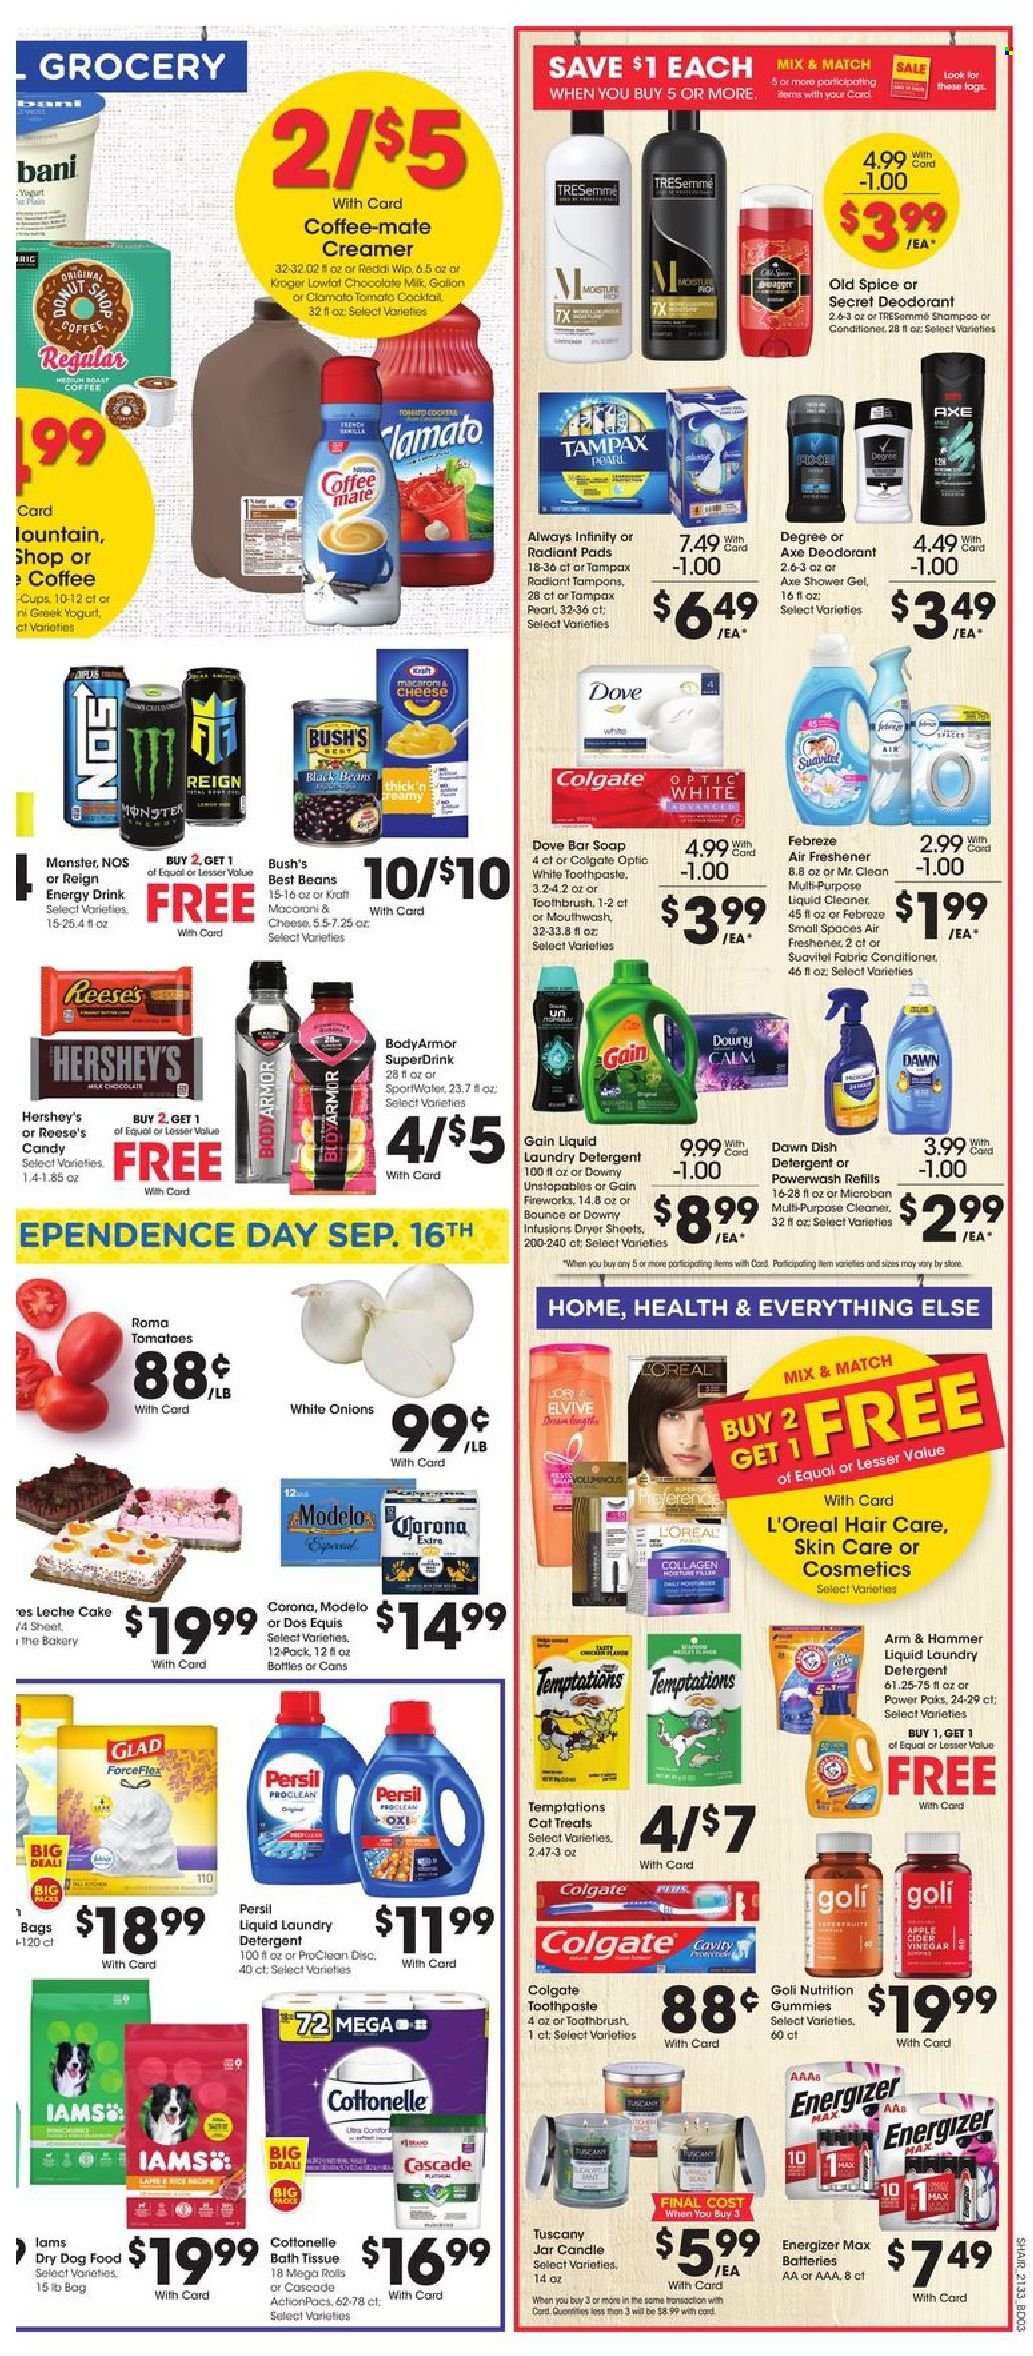 thumbnail - Kroger Flyer - 09/15/2021 - 09/21/2021 - Sales products - tomatoes, Kraft®, greek yoghurt, yoghurt, Coffee-Mate, milk, creamer, Reese's, Hershey's, milk chocolate, chocolate, ARM & HAMMER, spice, vinegar, energy drink, Monster, Clamato, beer, Corona Extra, Modelo, Dove, bath tissue, detergent, Febreze, Gain, cleaner, liquid cleaner, Cascade, Unstopables, Persil, laundry detergent, Gain Fireworks, Downy Laundry, shampoo, shower gel, Old Spice, soap bar, soap, Colgate, toothbrush, toothpaste, mouthwash, Tampax, tampons, Always Infinity, L’Oréal, TRESemmé, anti-perspirant, deodorant, cup, candle, air freshener, battery, Energizer, animal food, dog food, dry dog food, Iams, Dos Equis. Page 6.